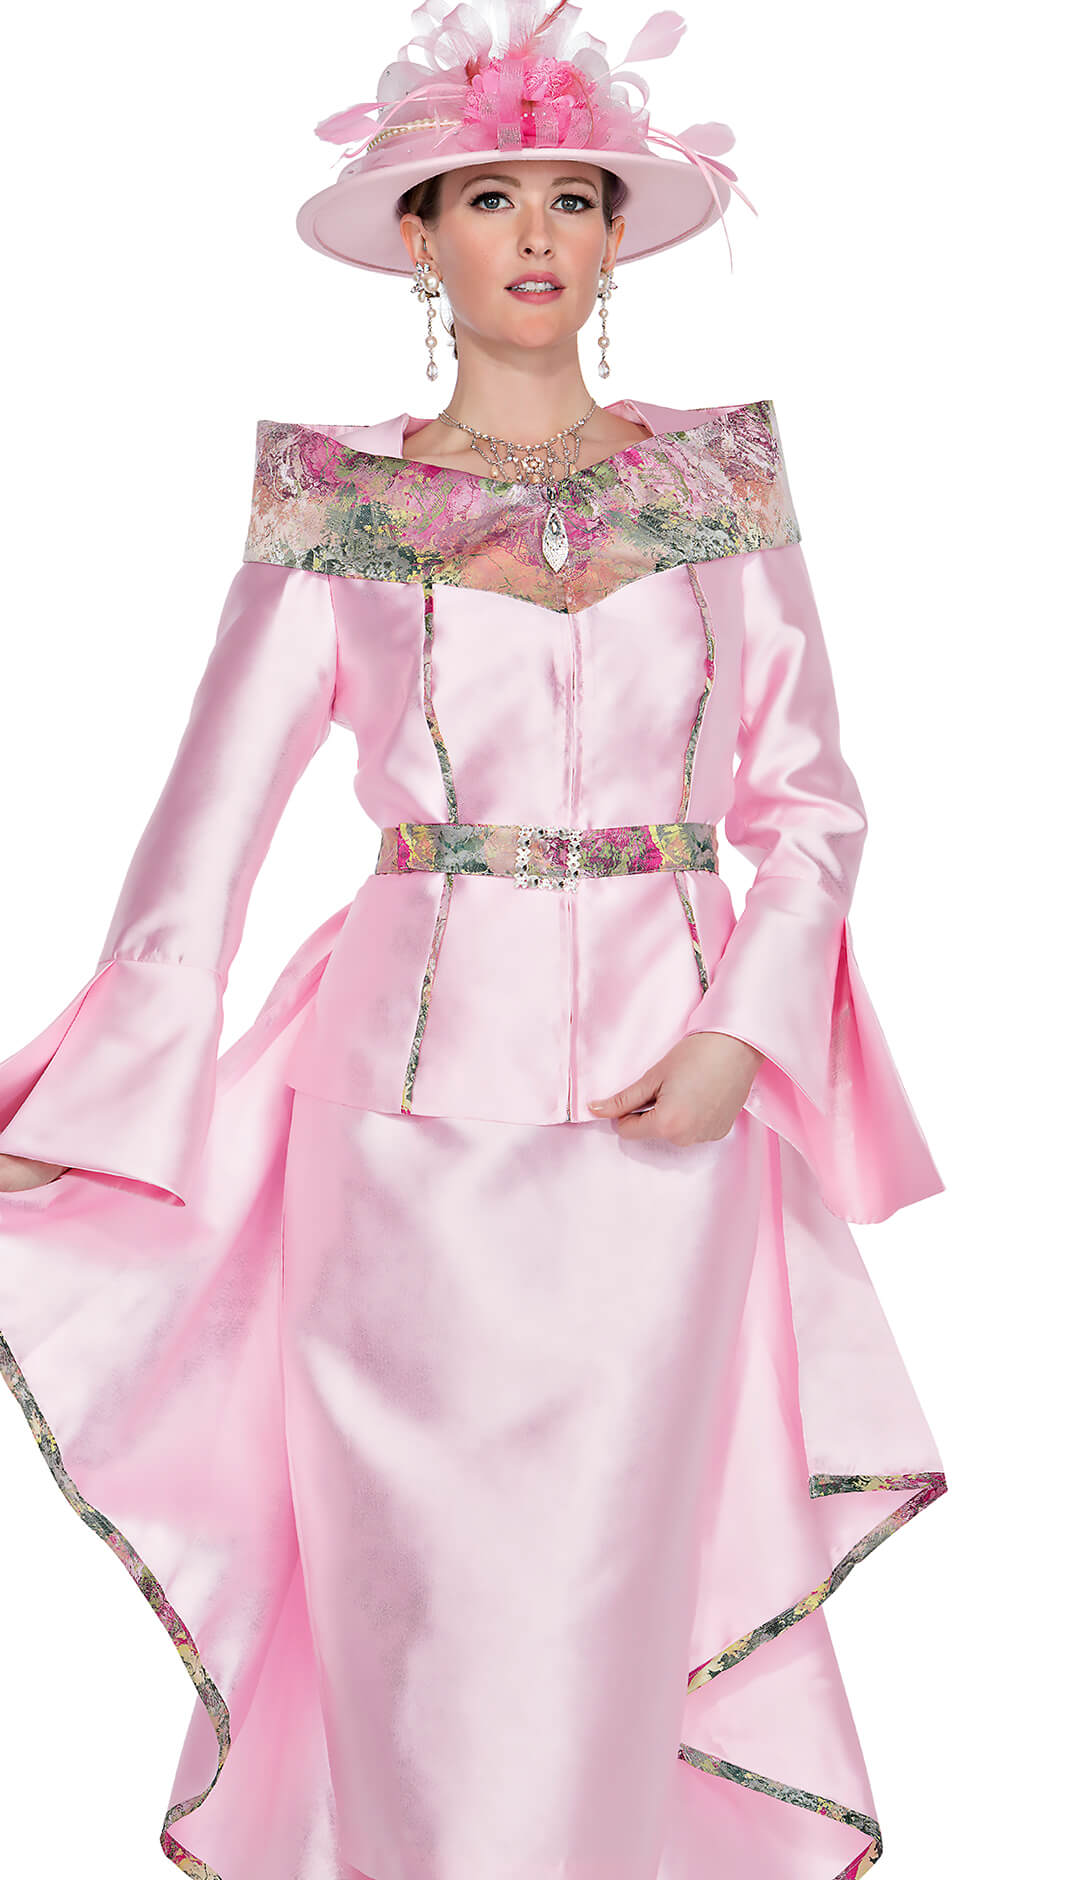 Elite Champagne Church Suit 5861-Pink - Church Suits For Less